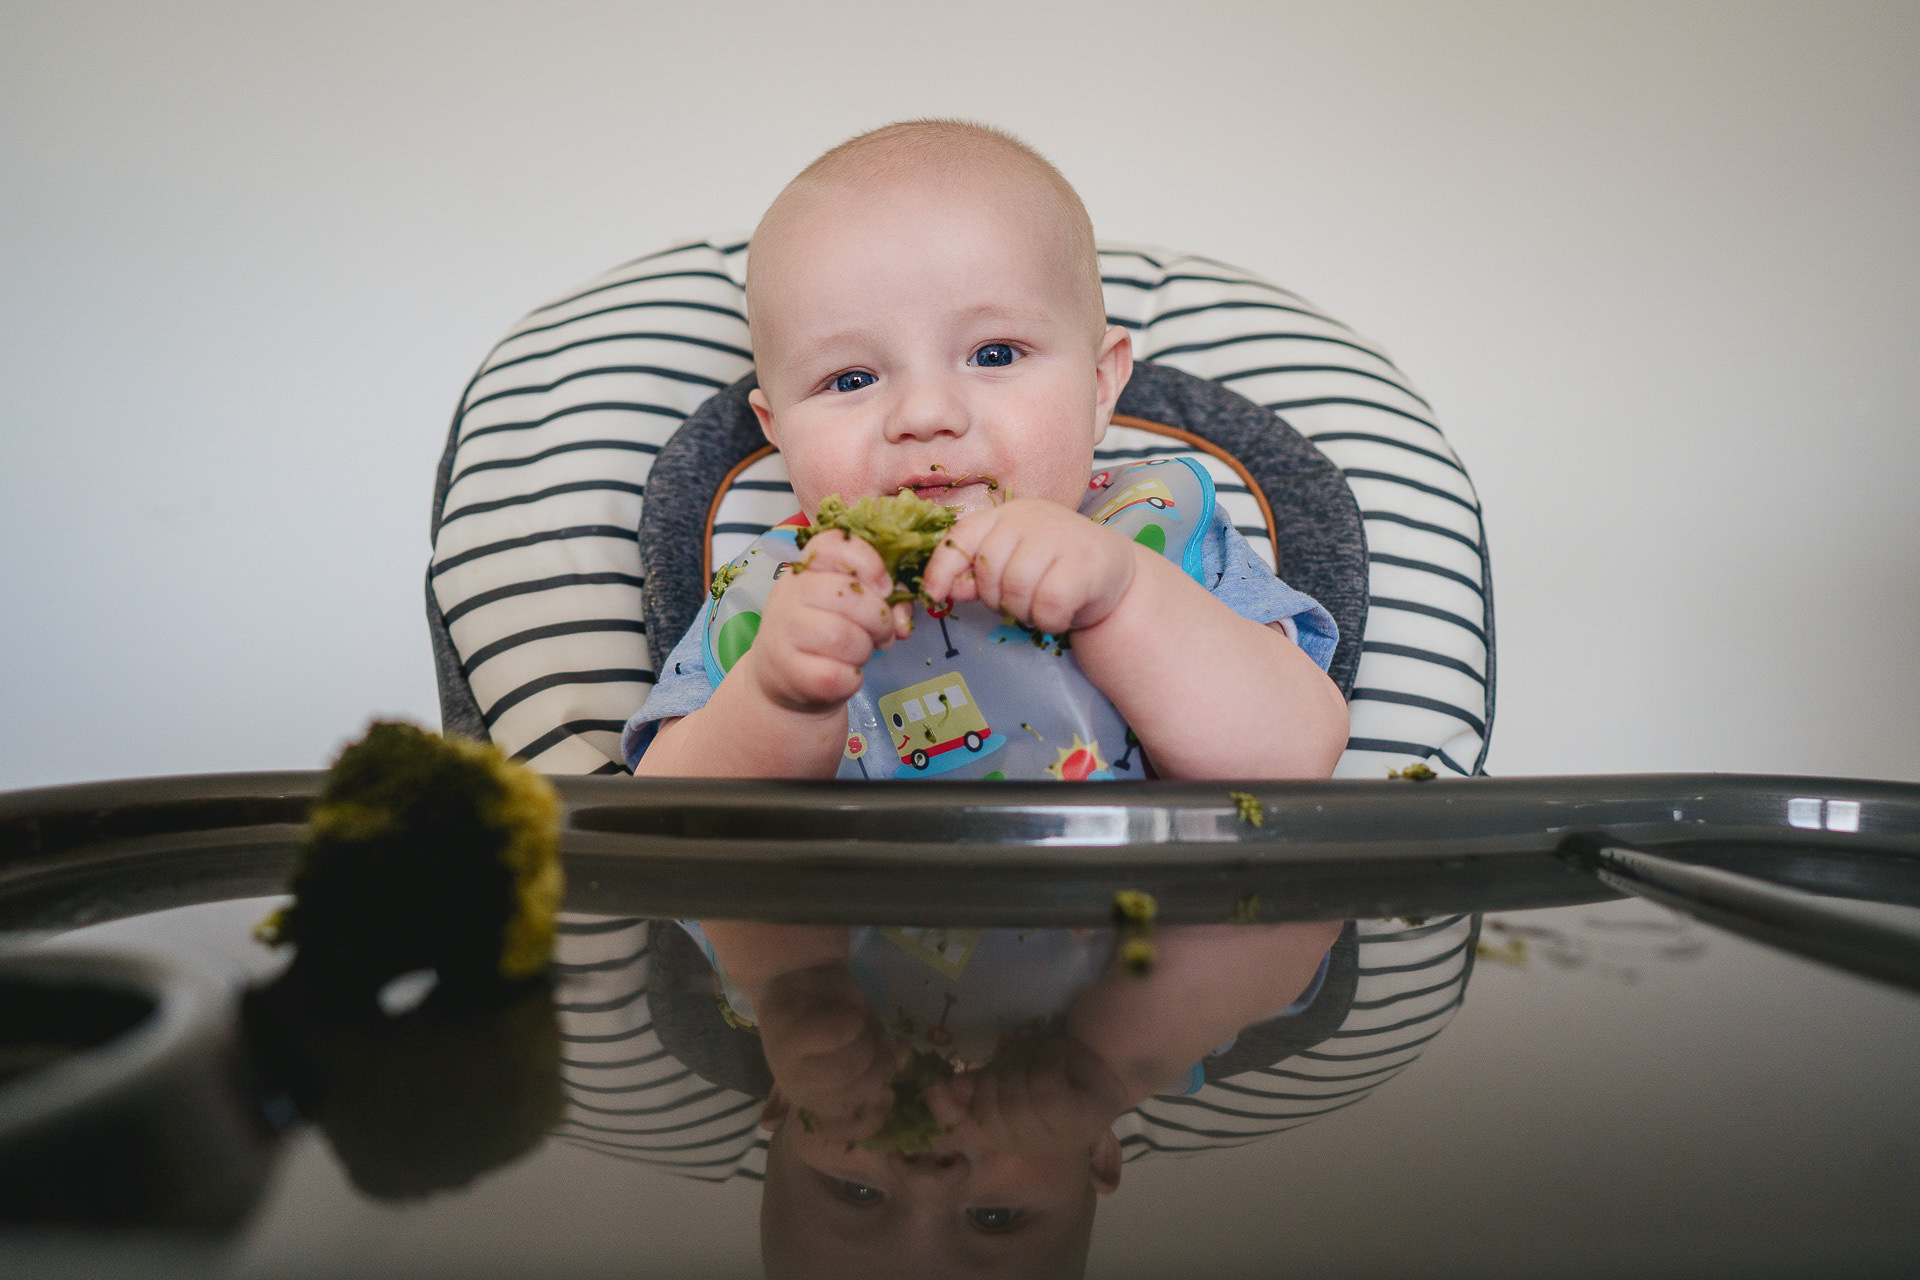 A baby in a high chair eating broccoli